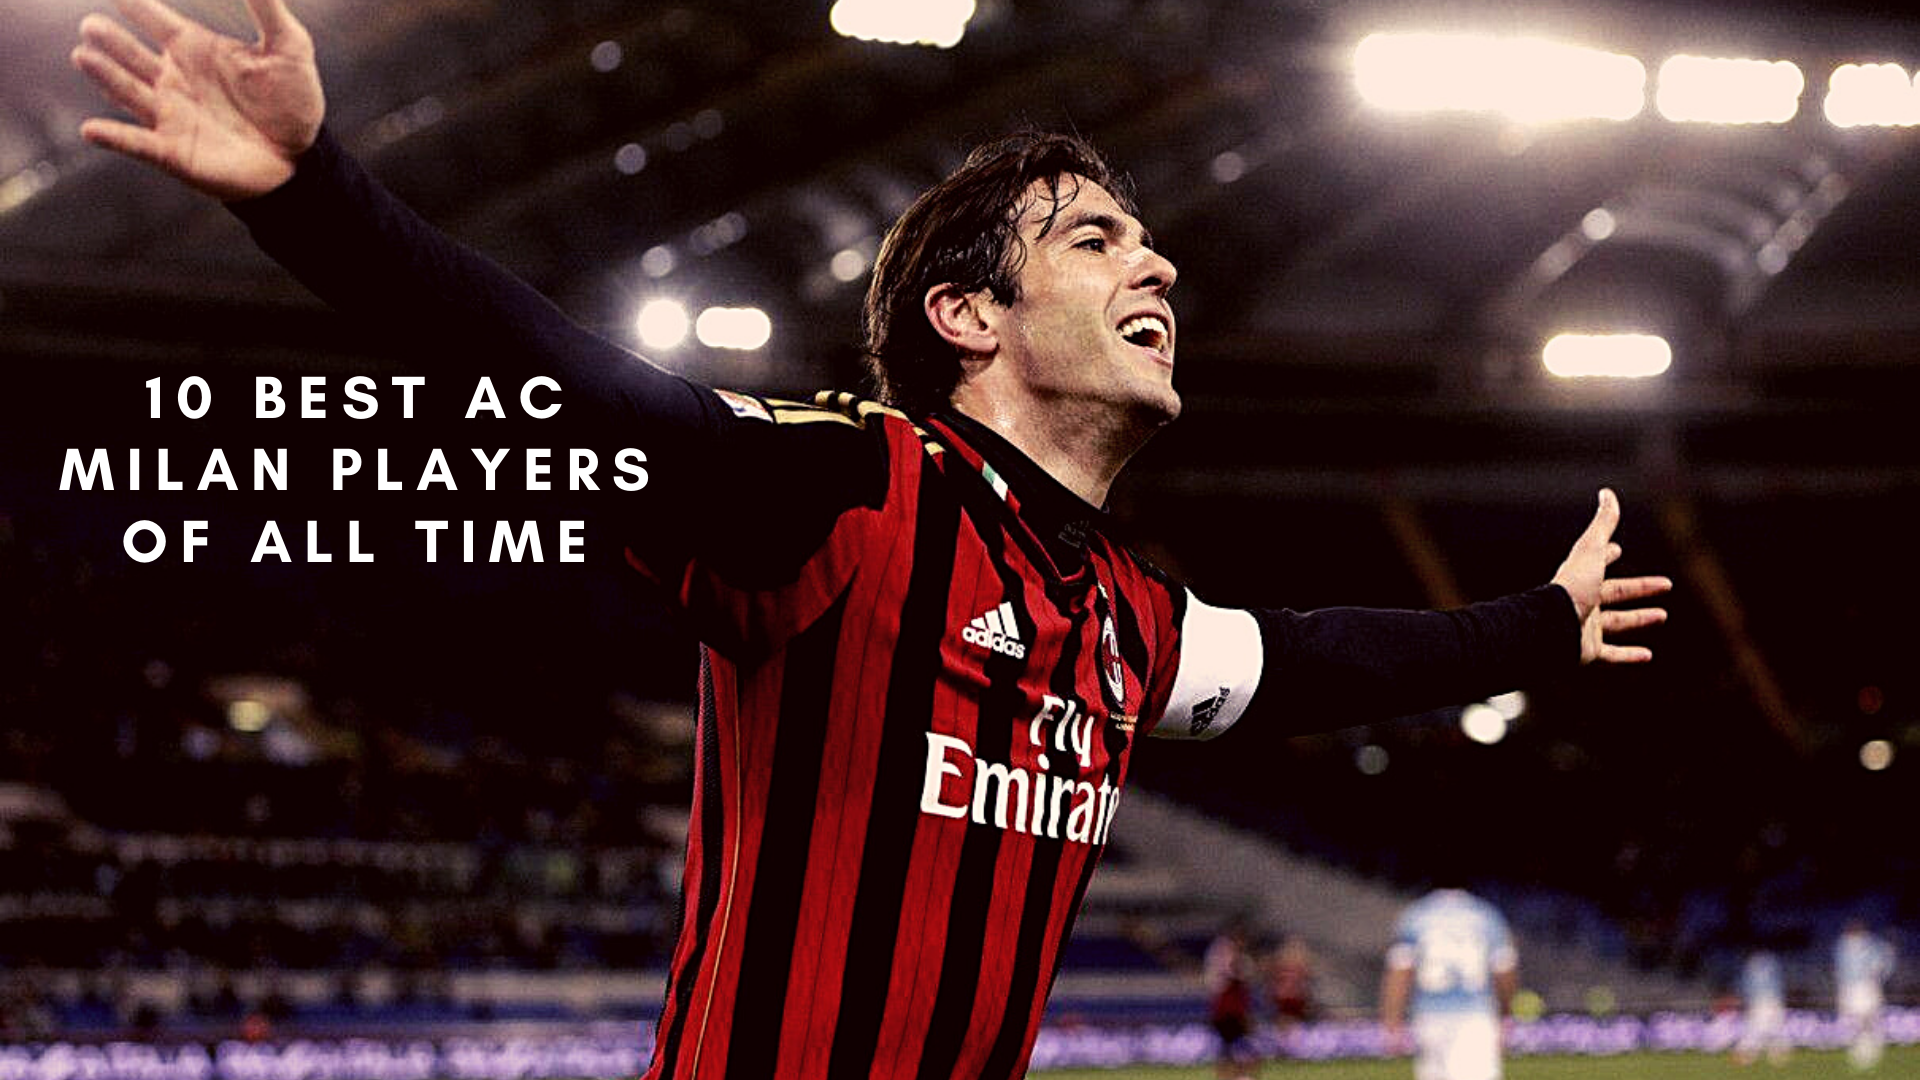 Ranking the Best AC Milan of all time